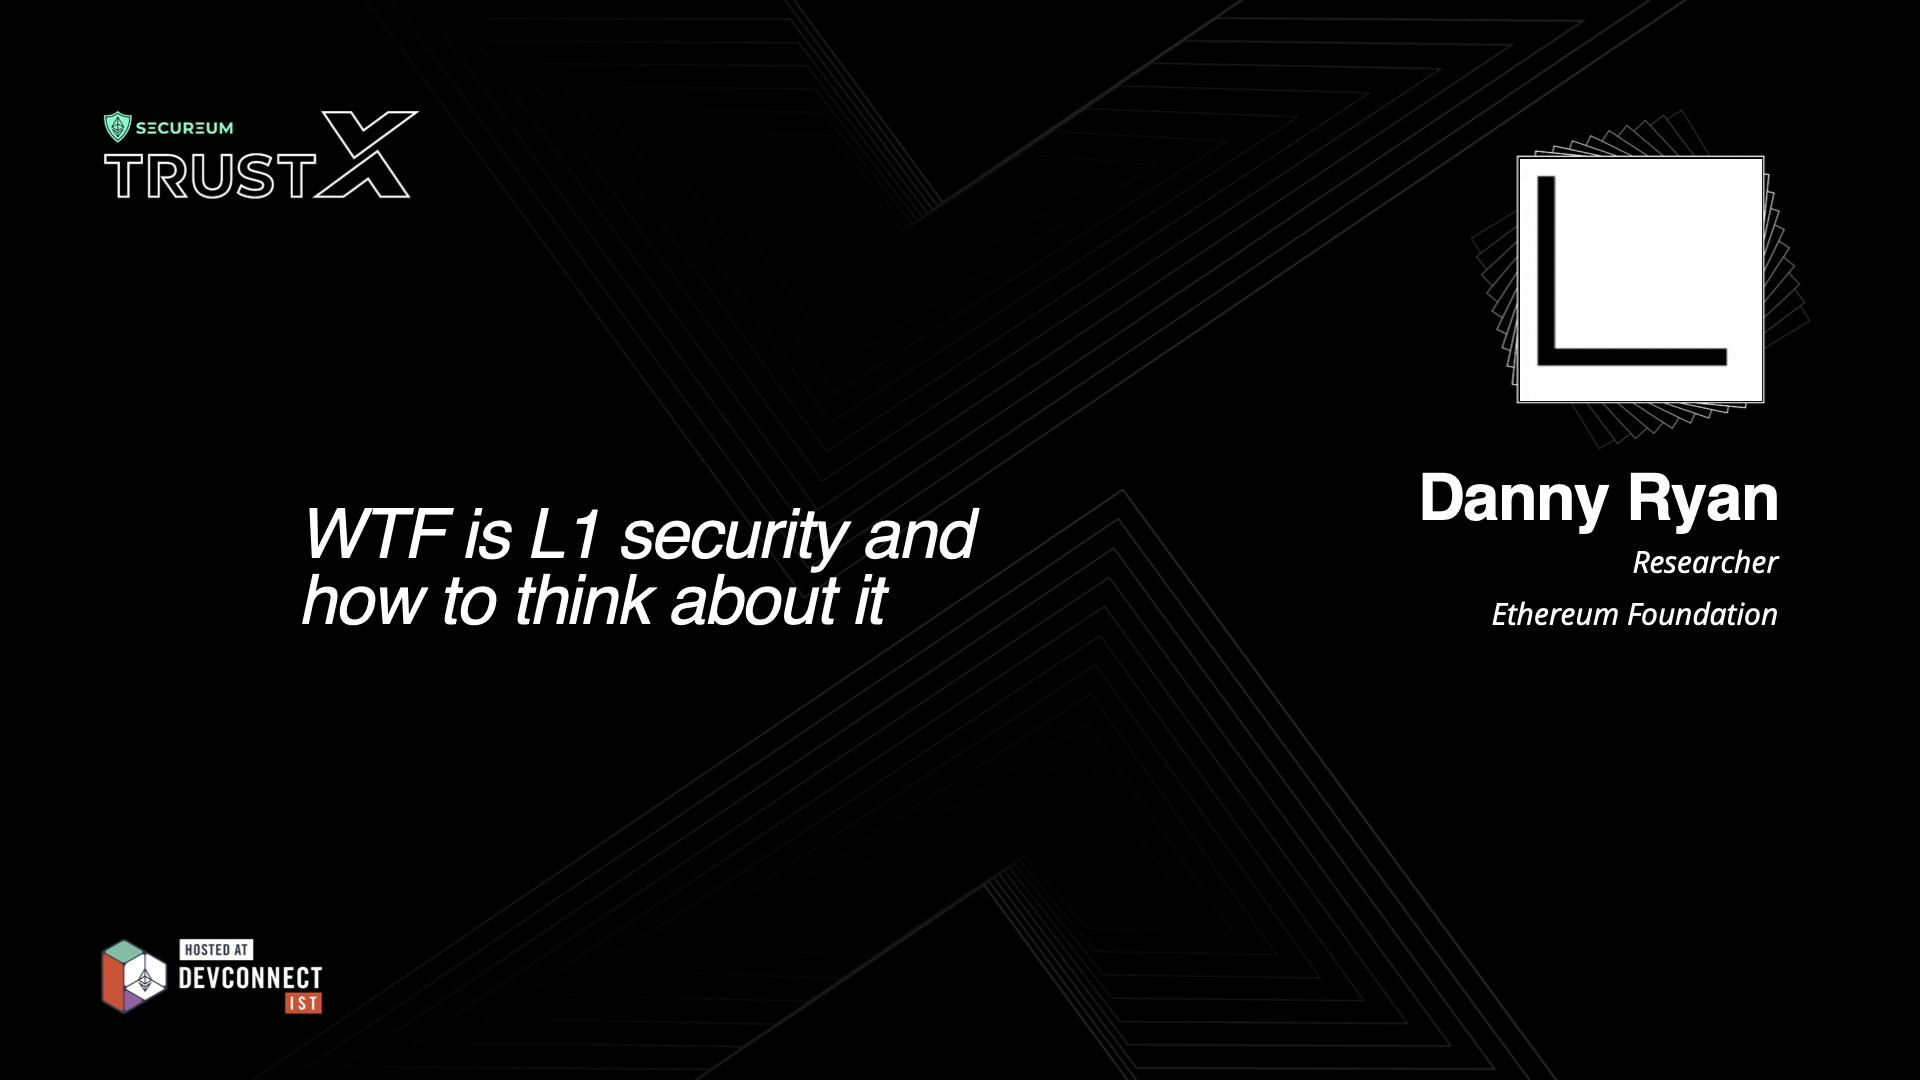 WTF is L1 security and how to think about it